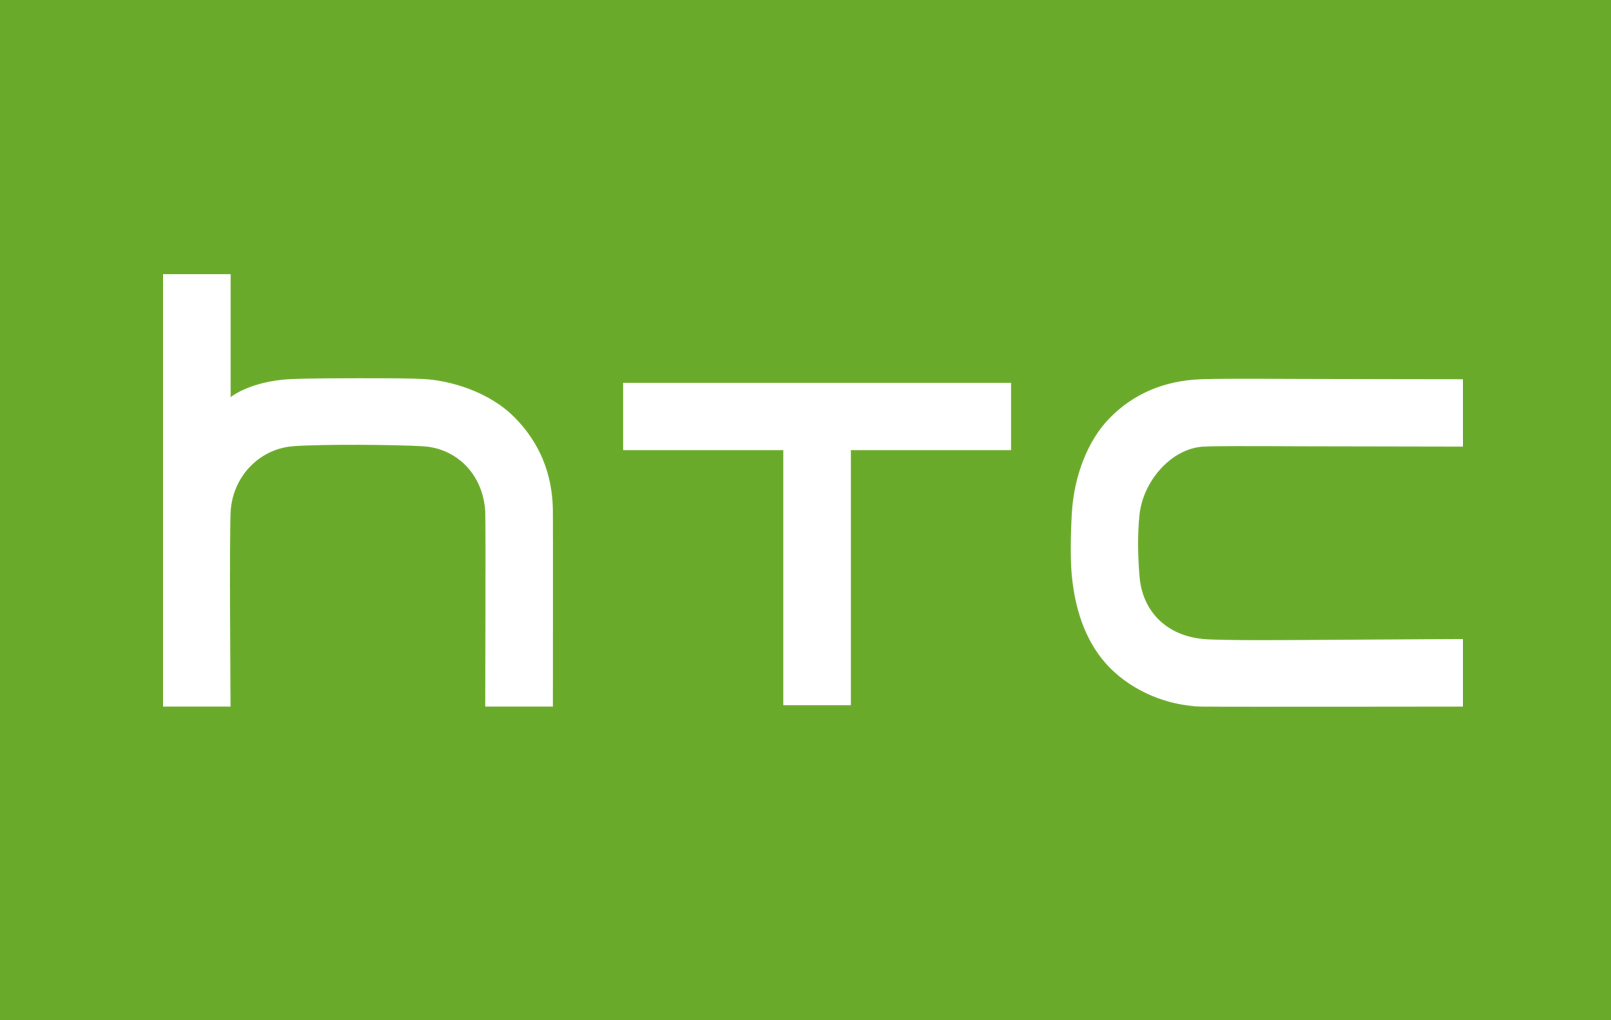 HTC's tough times continue as the company lays off 1500 employees